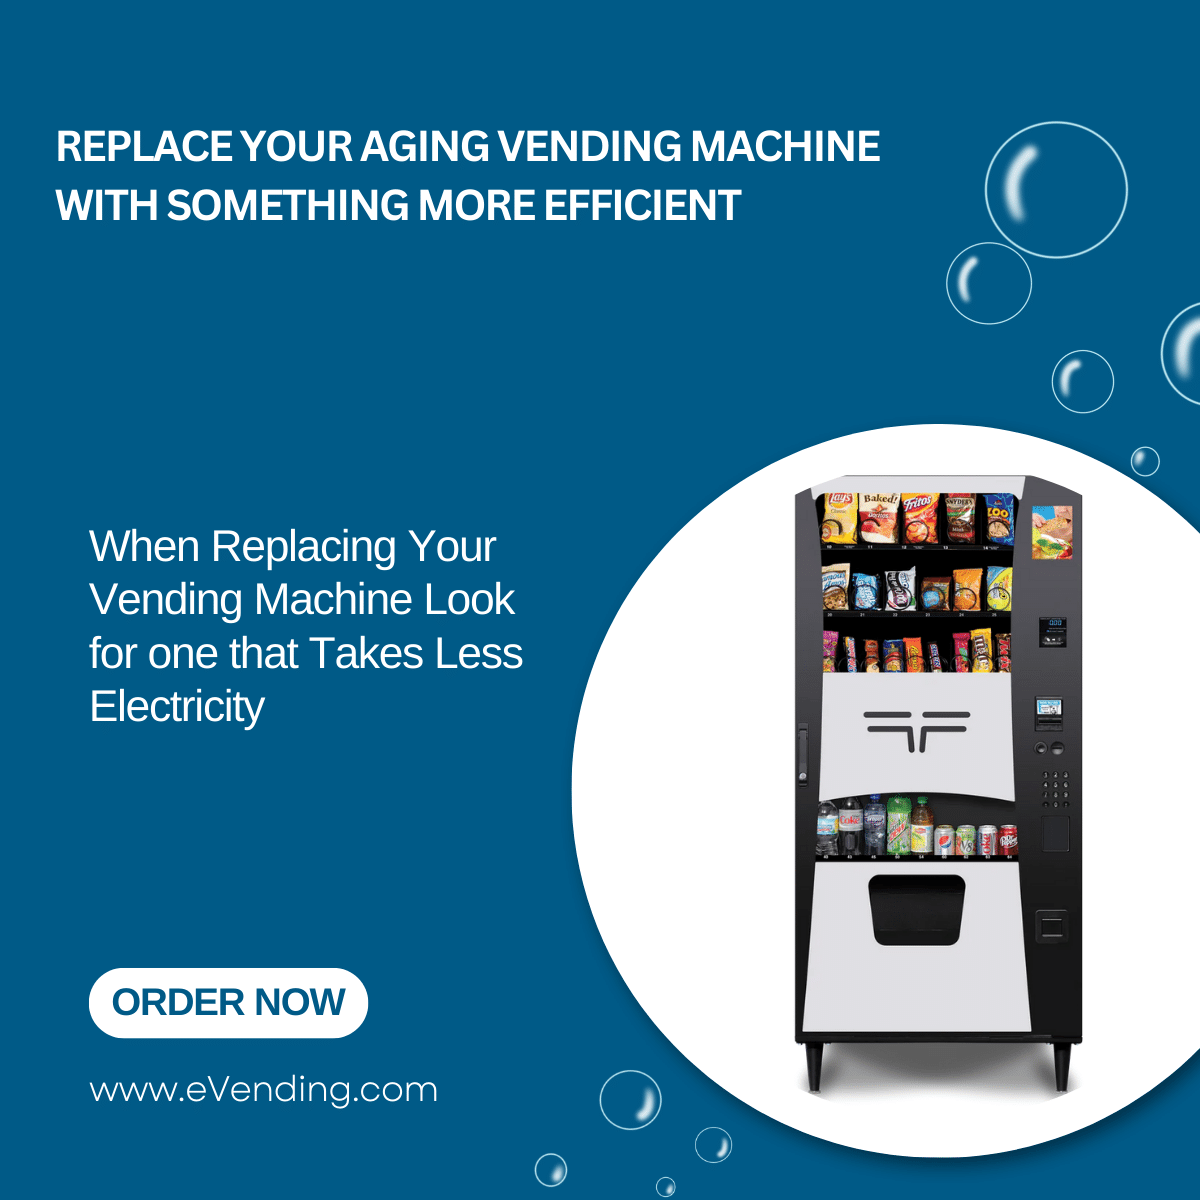 REPLACE YOUR AGING VENDING MACHINE WITH SOMETHING MORE EFFICIENT